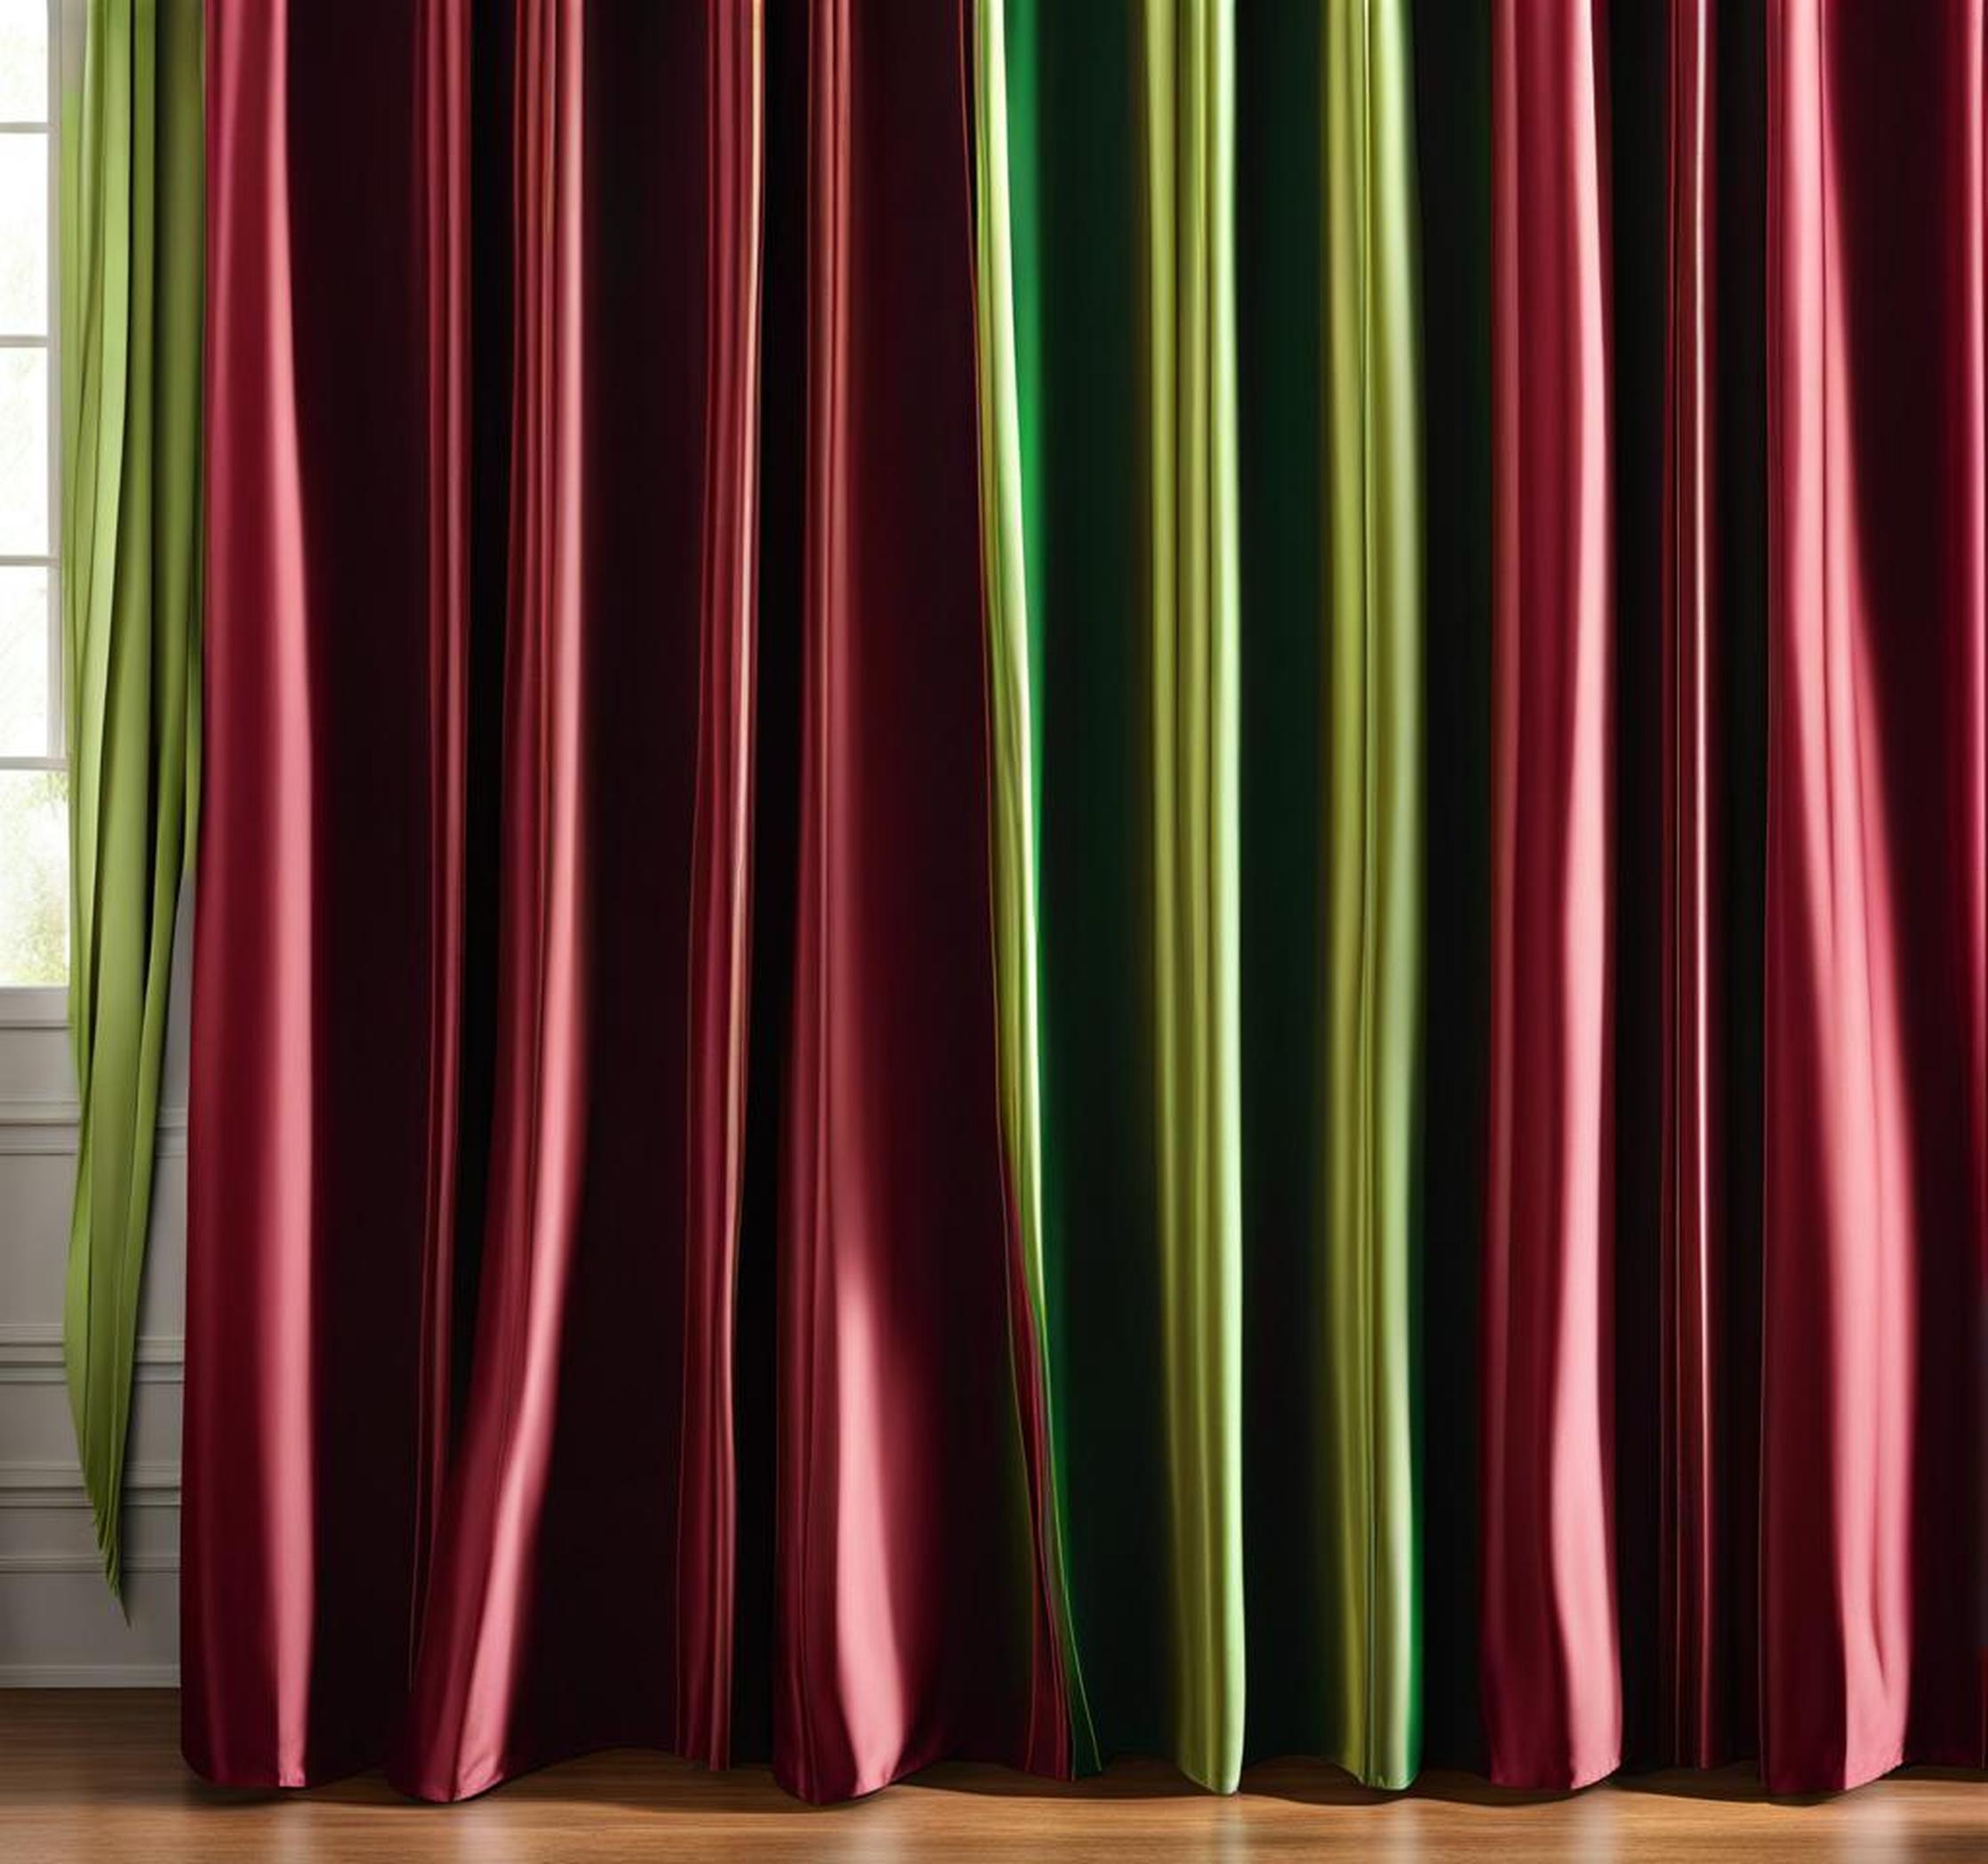 Customize Your Lighting With Stunning Burgundy and Green Patterned Curtains